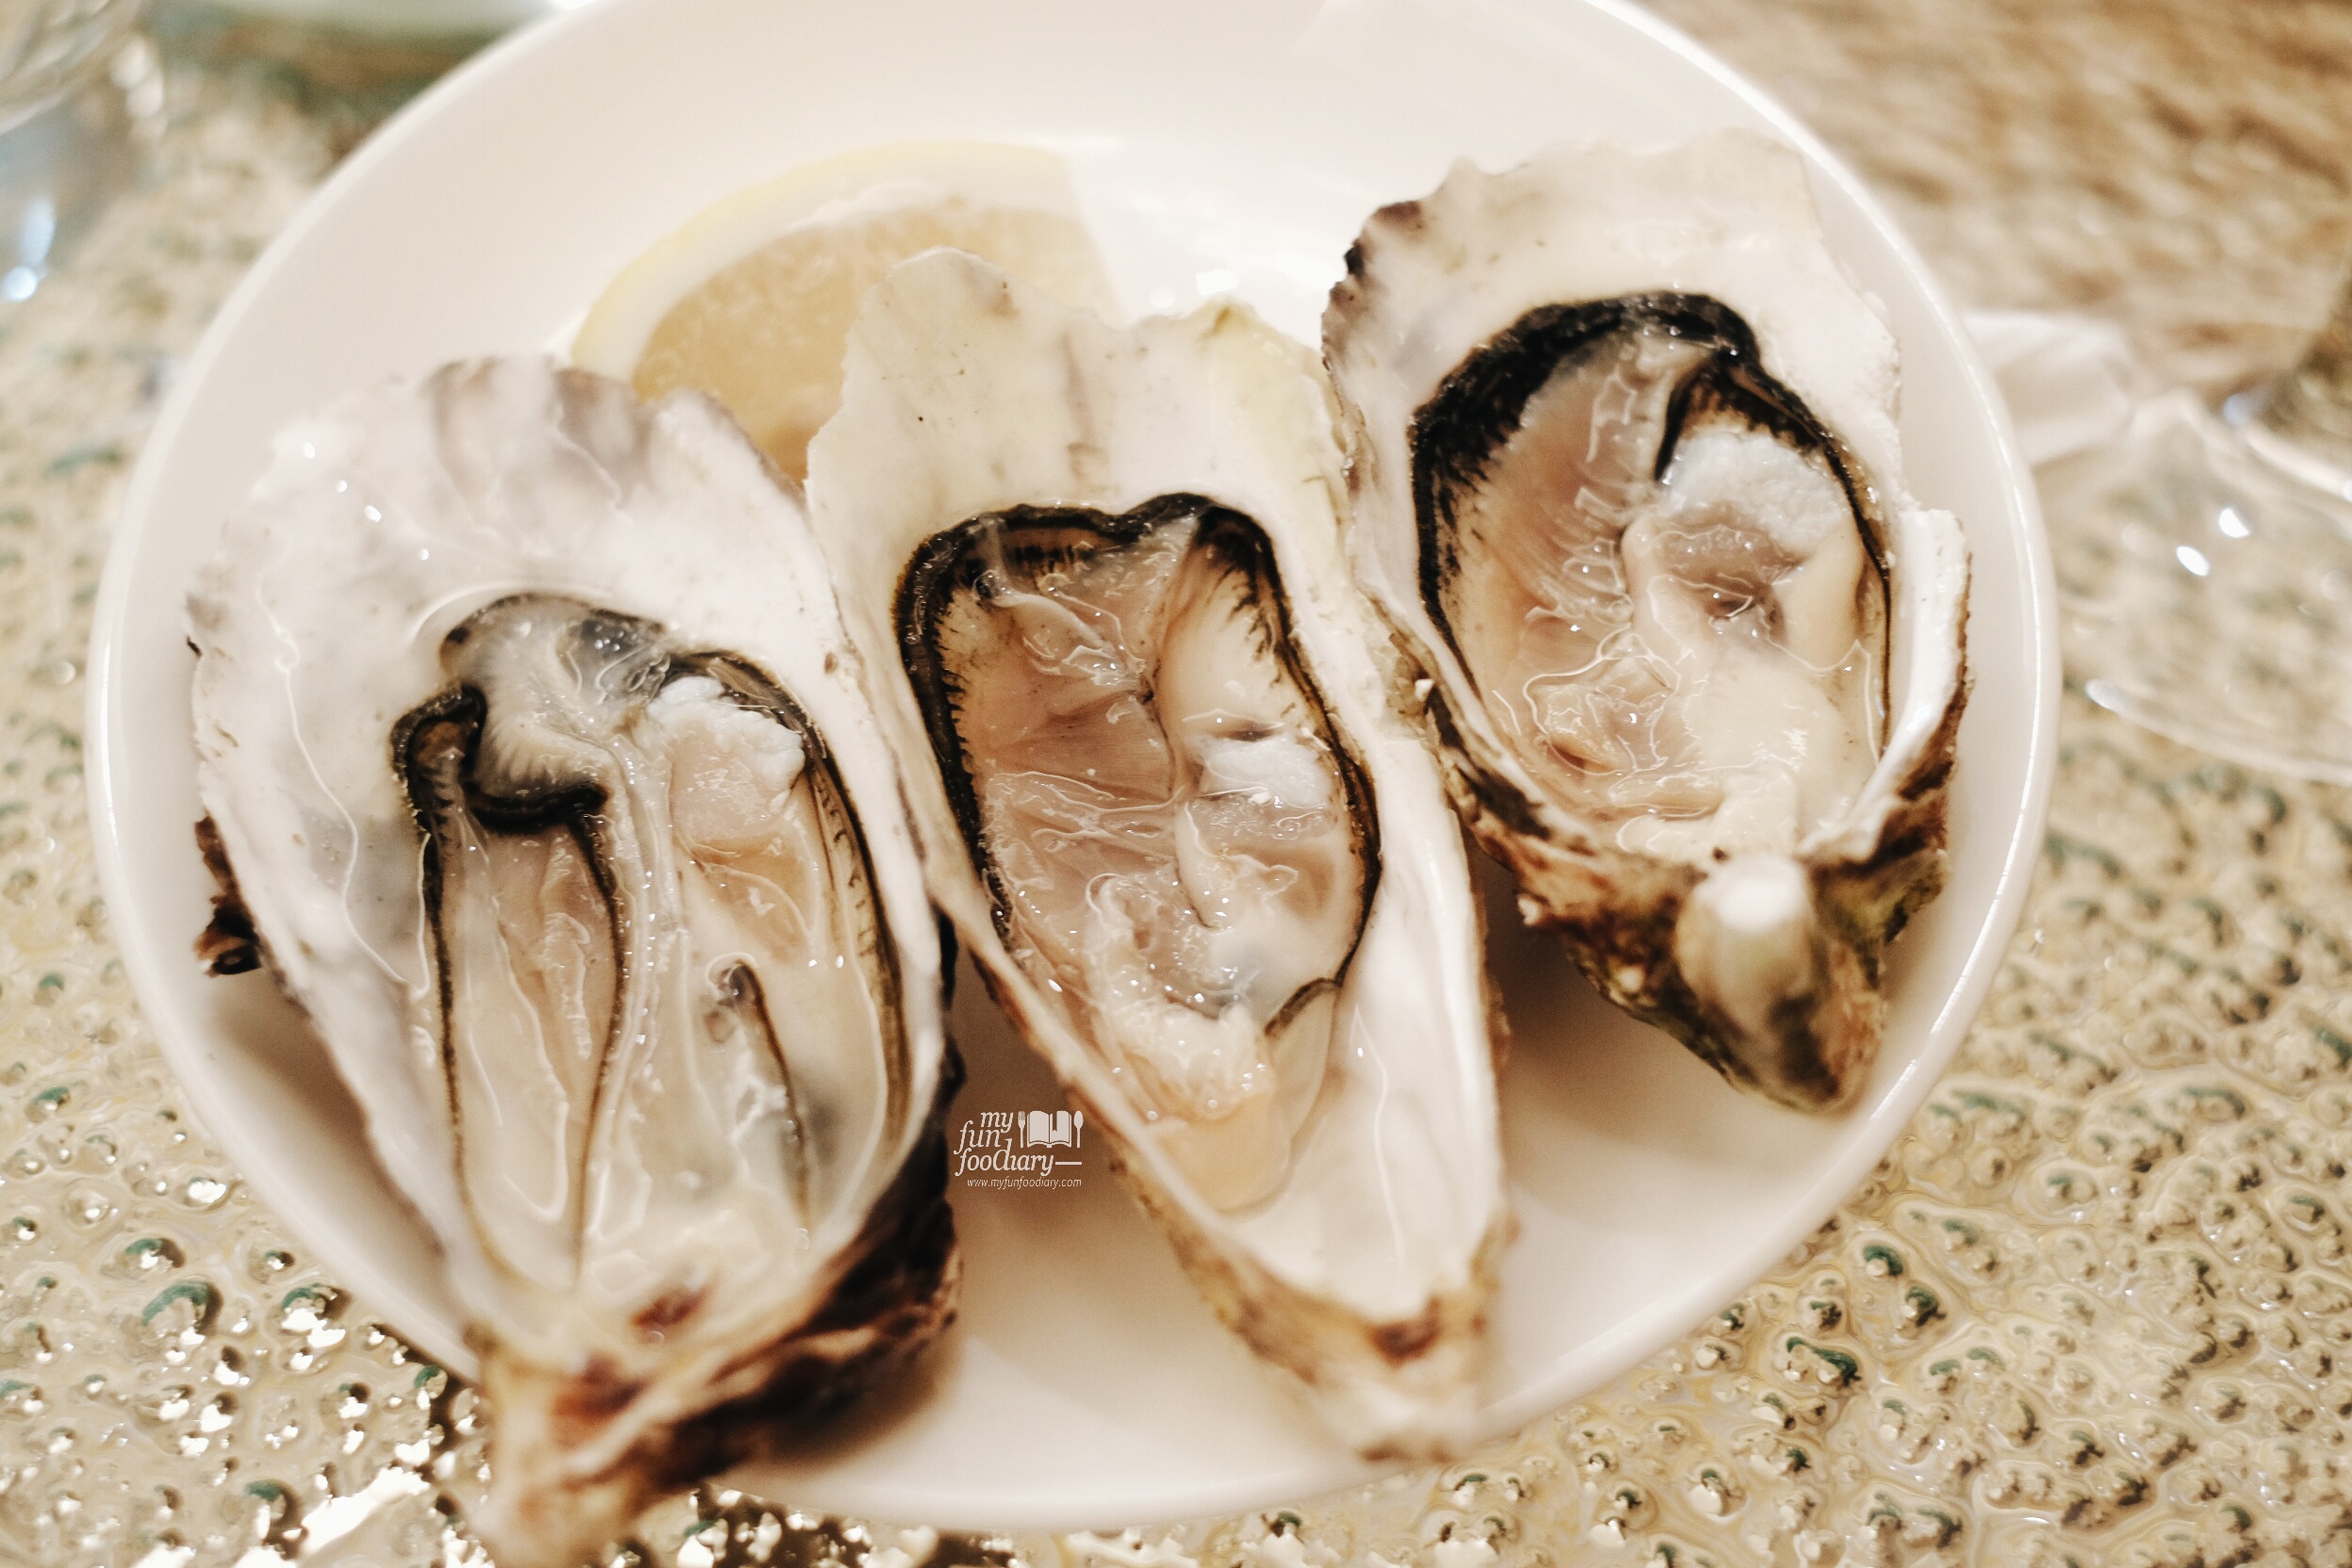 Three kinds of France Oysters Tasting at Conrad Singapore by Myfunfoodiary